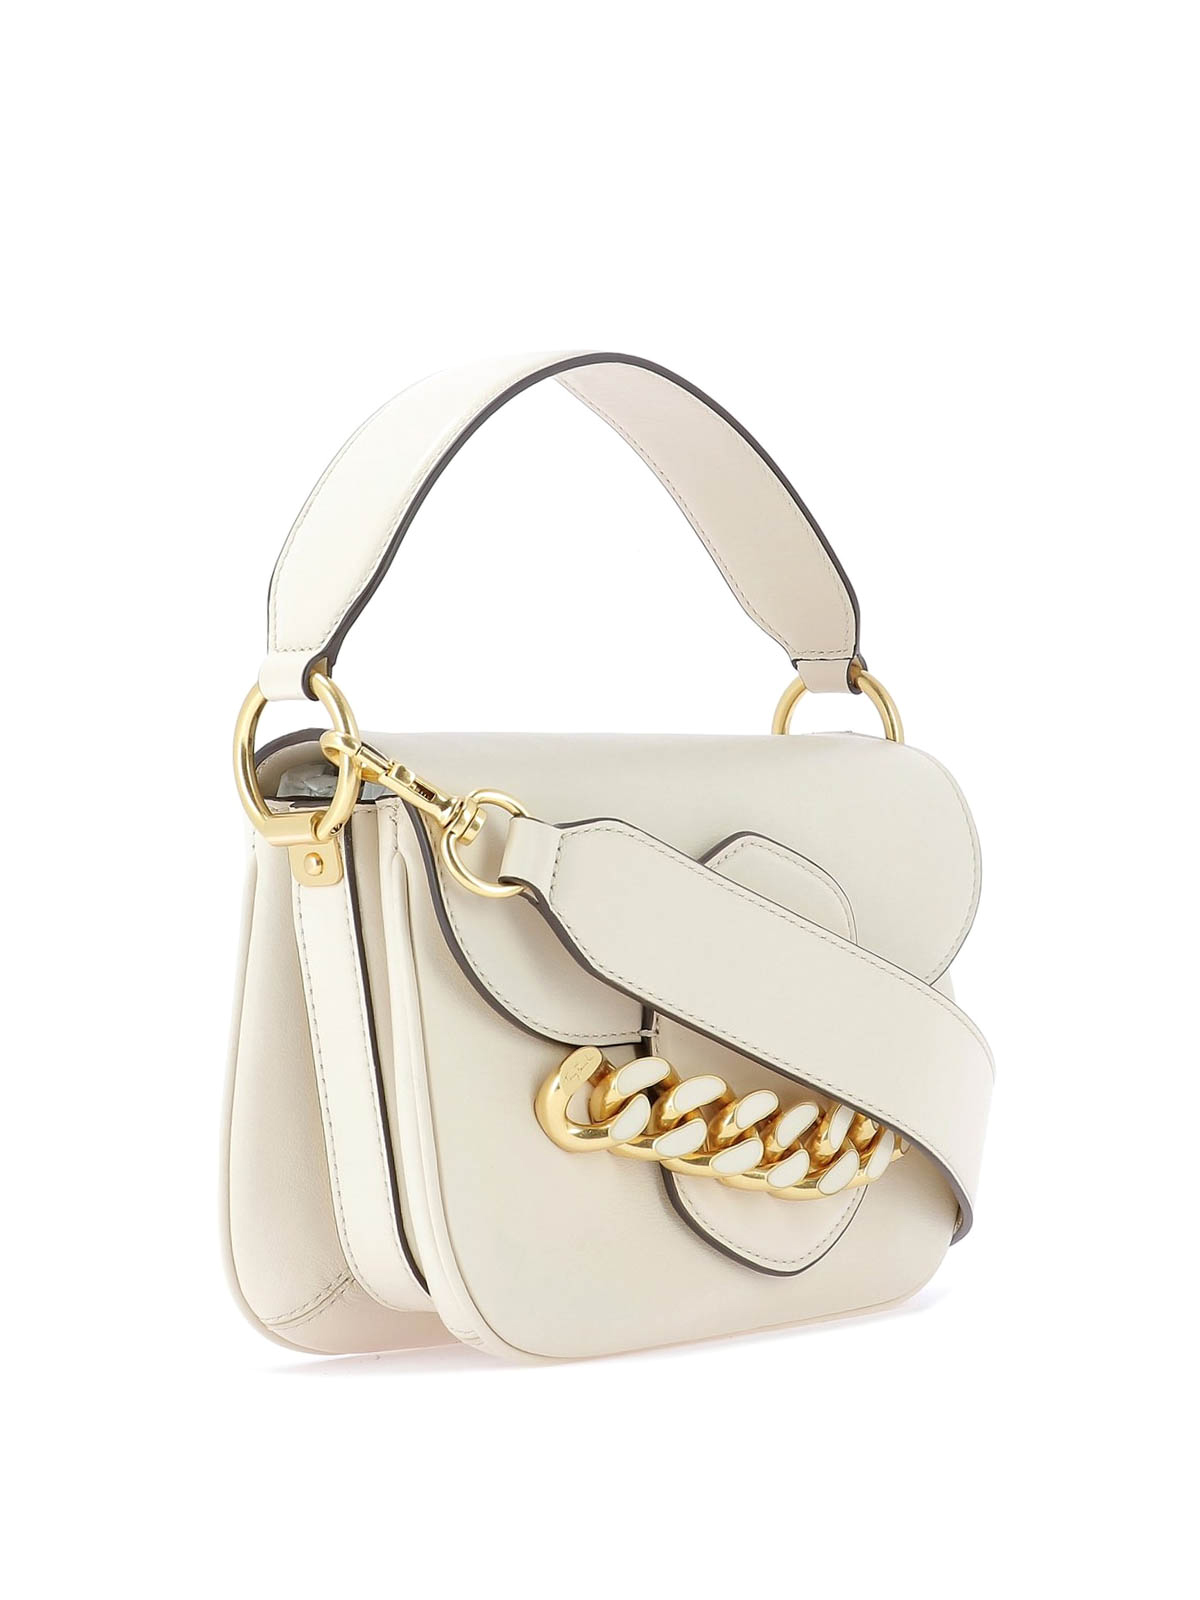 Cross body bags Tory Burch - Jessie new cream leather chain small bag -  55007122